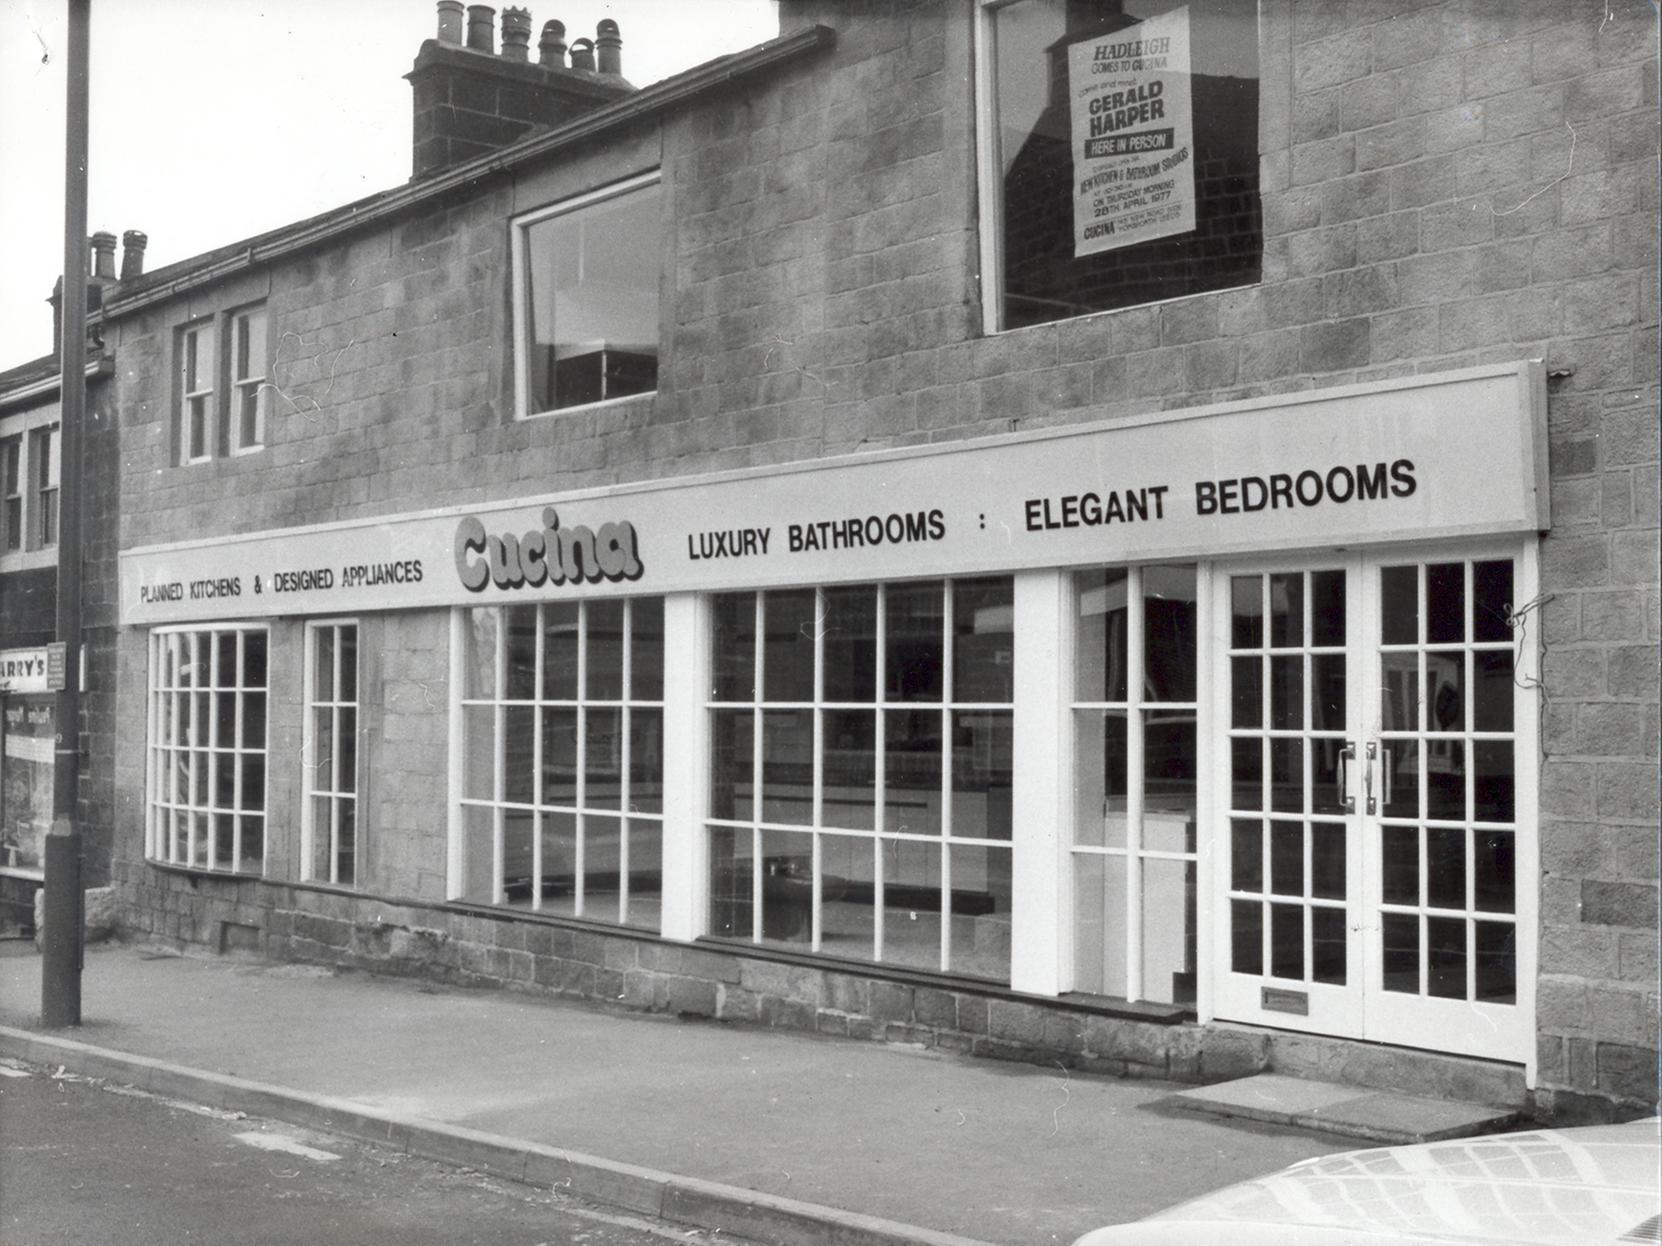 The Cucina showrooms in Horsforth was the place to go for luxury bathrooms and elegant bedrooms in the late 1970s.